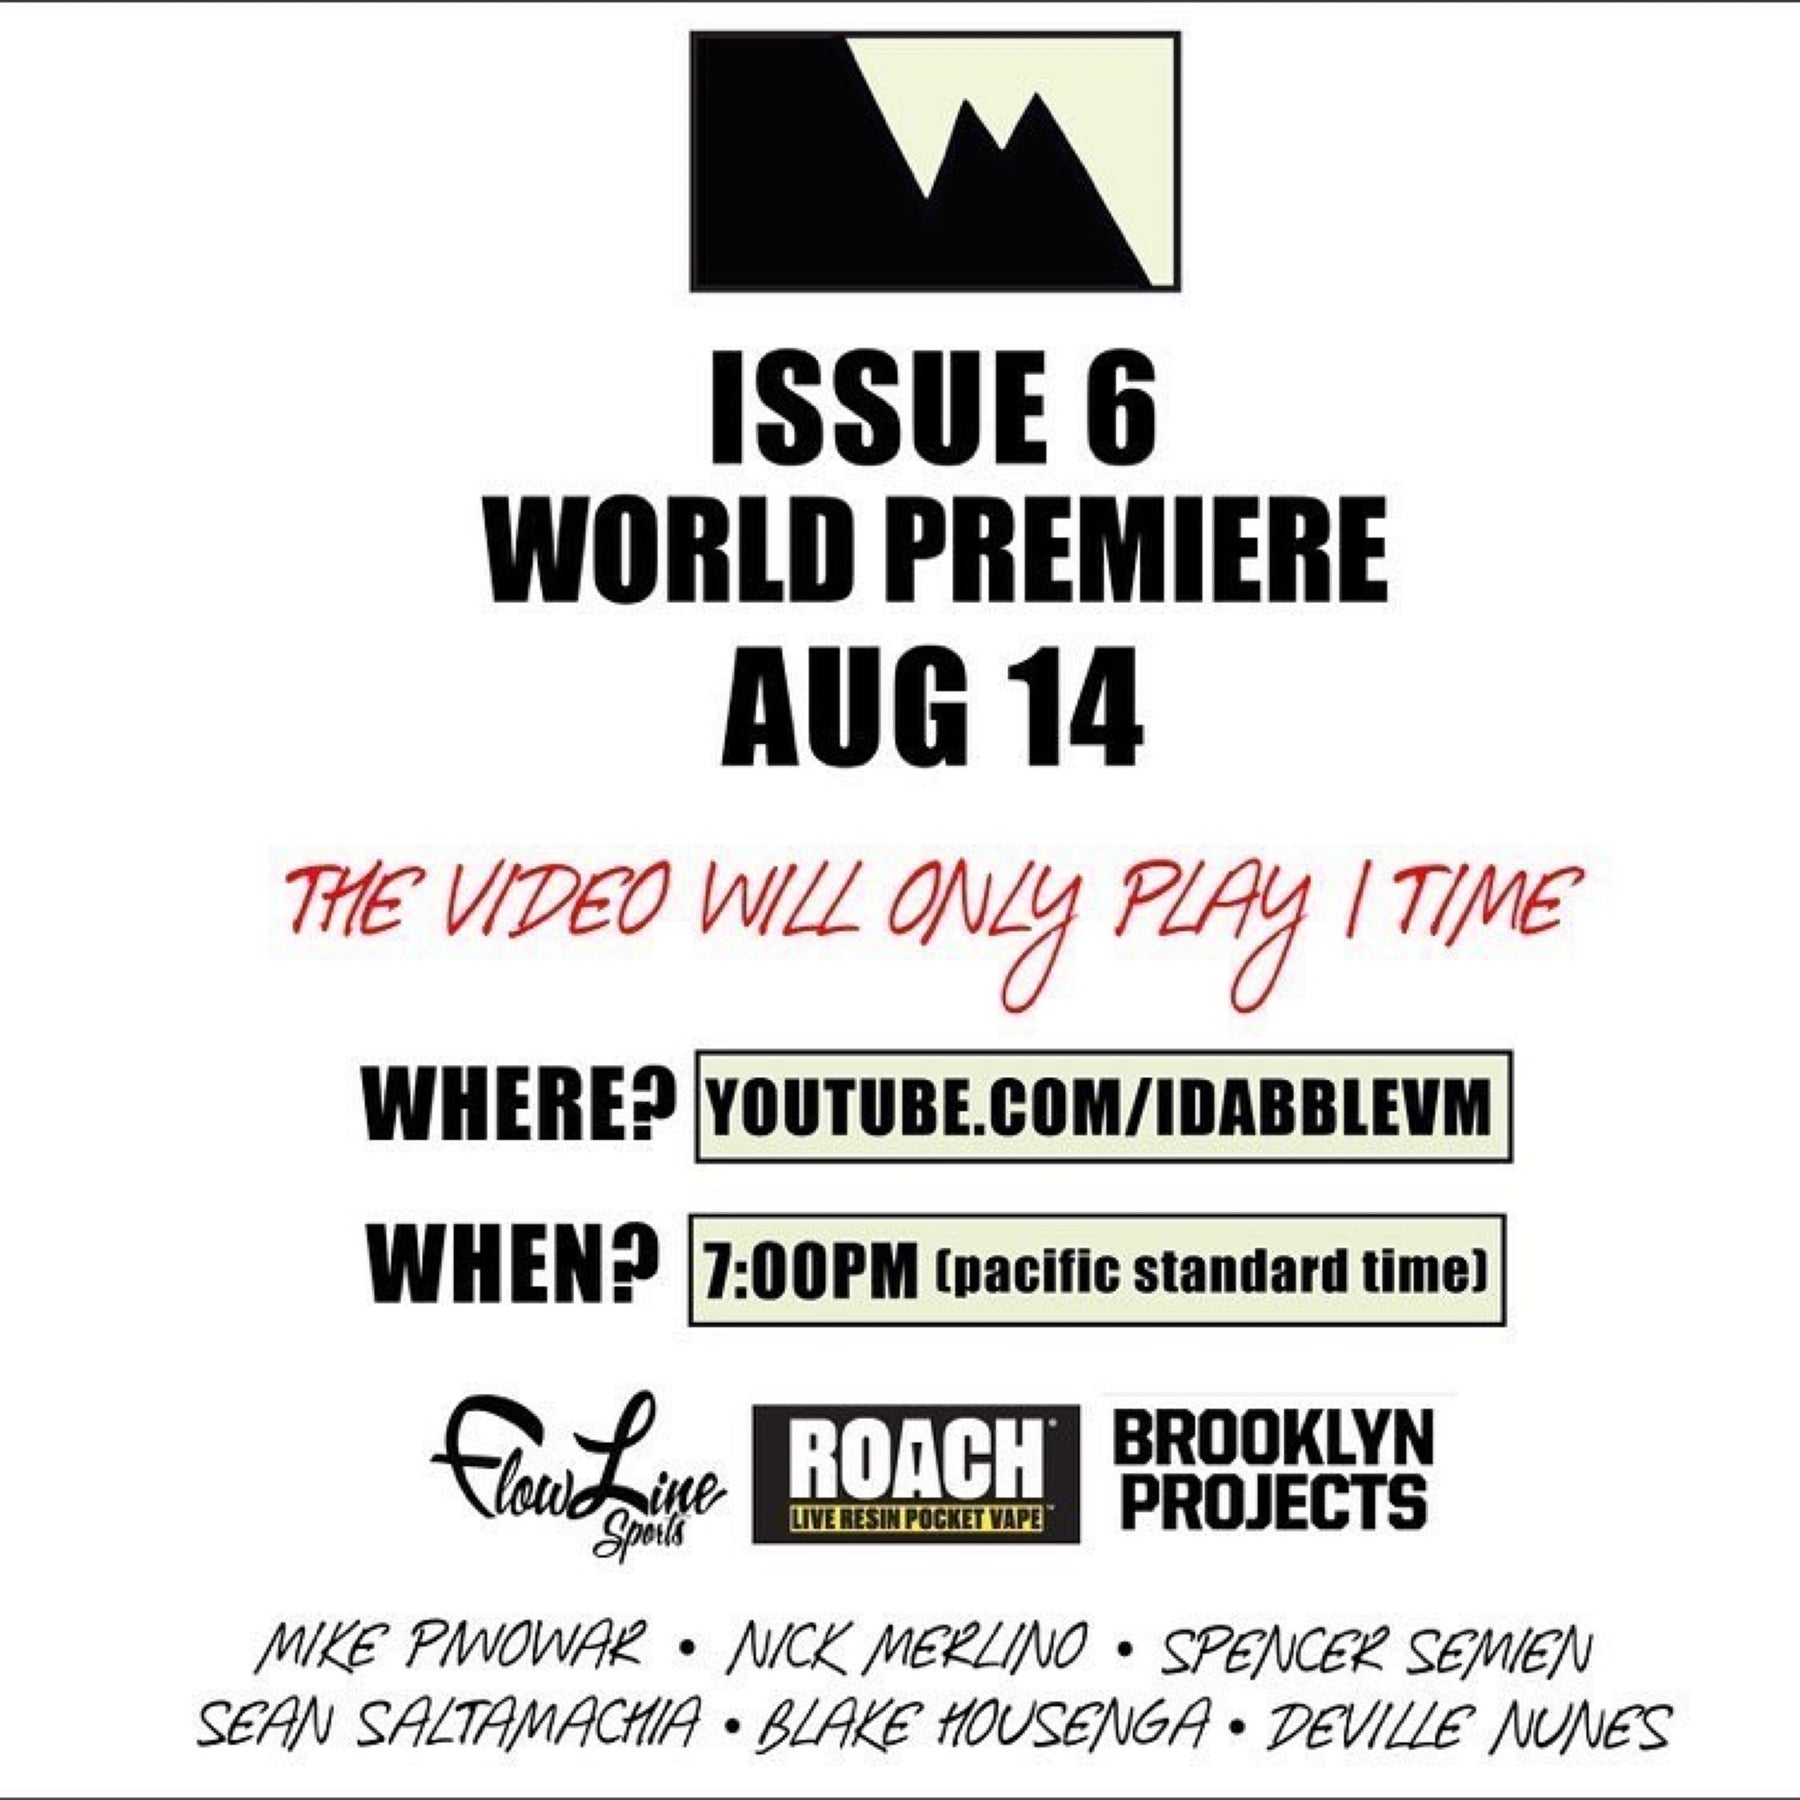 iDabble VM Issue 6 Premire Aug 14th on YouTube